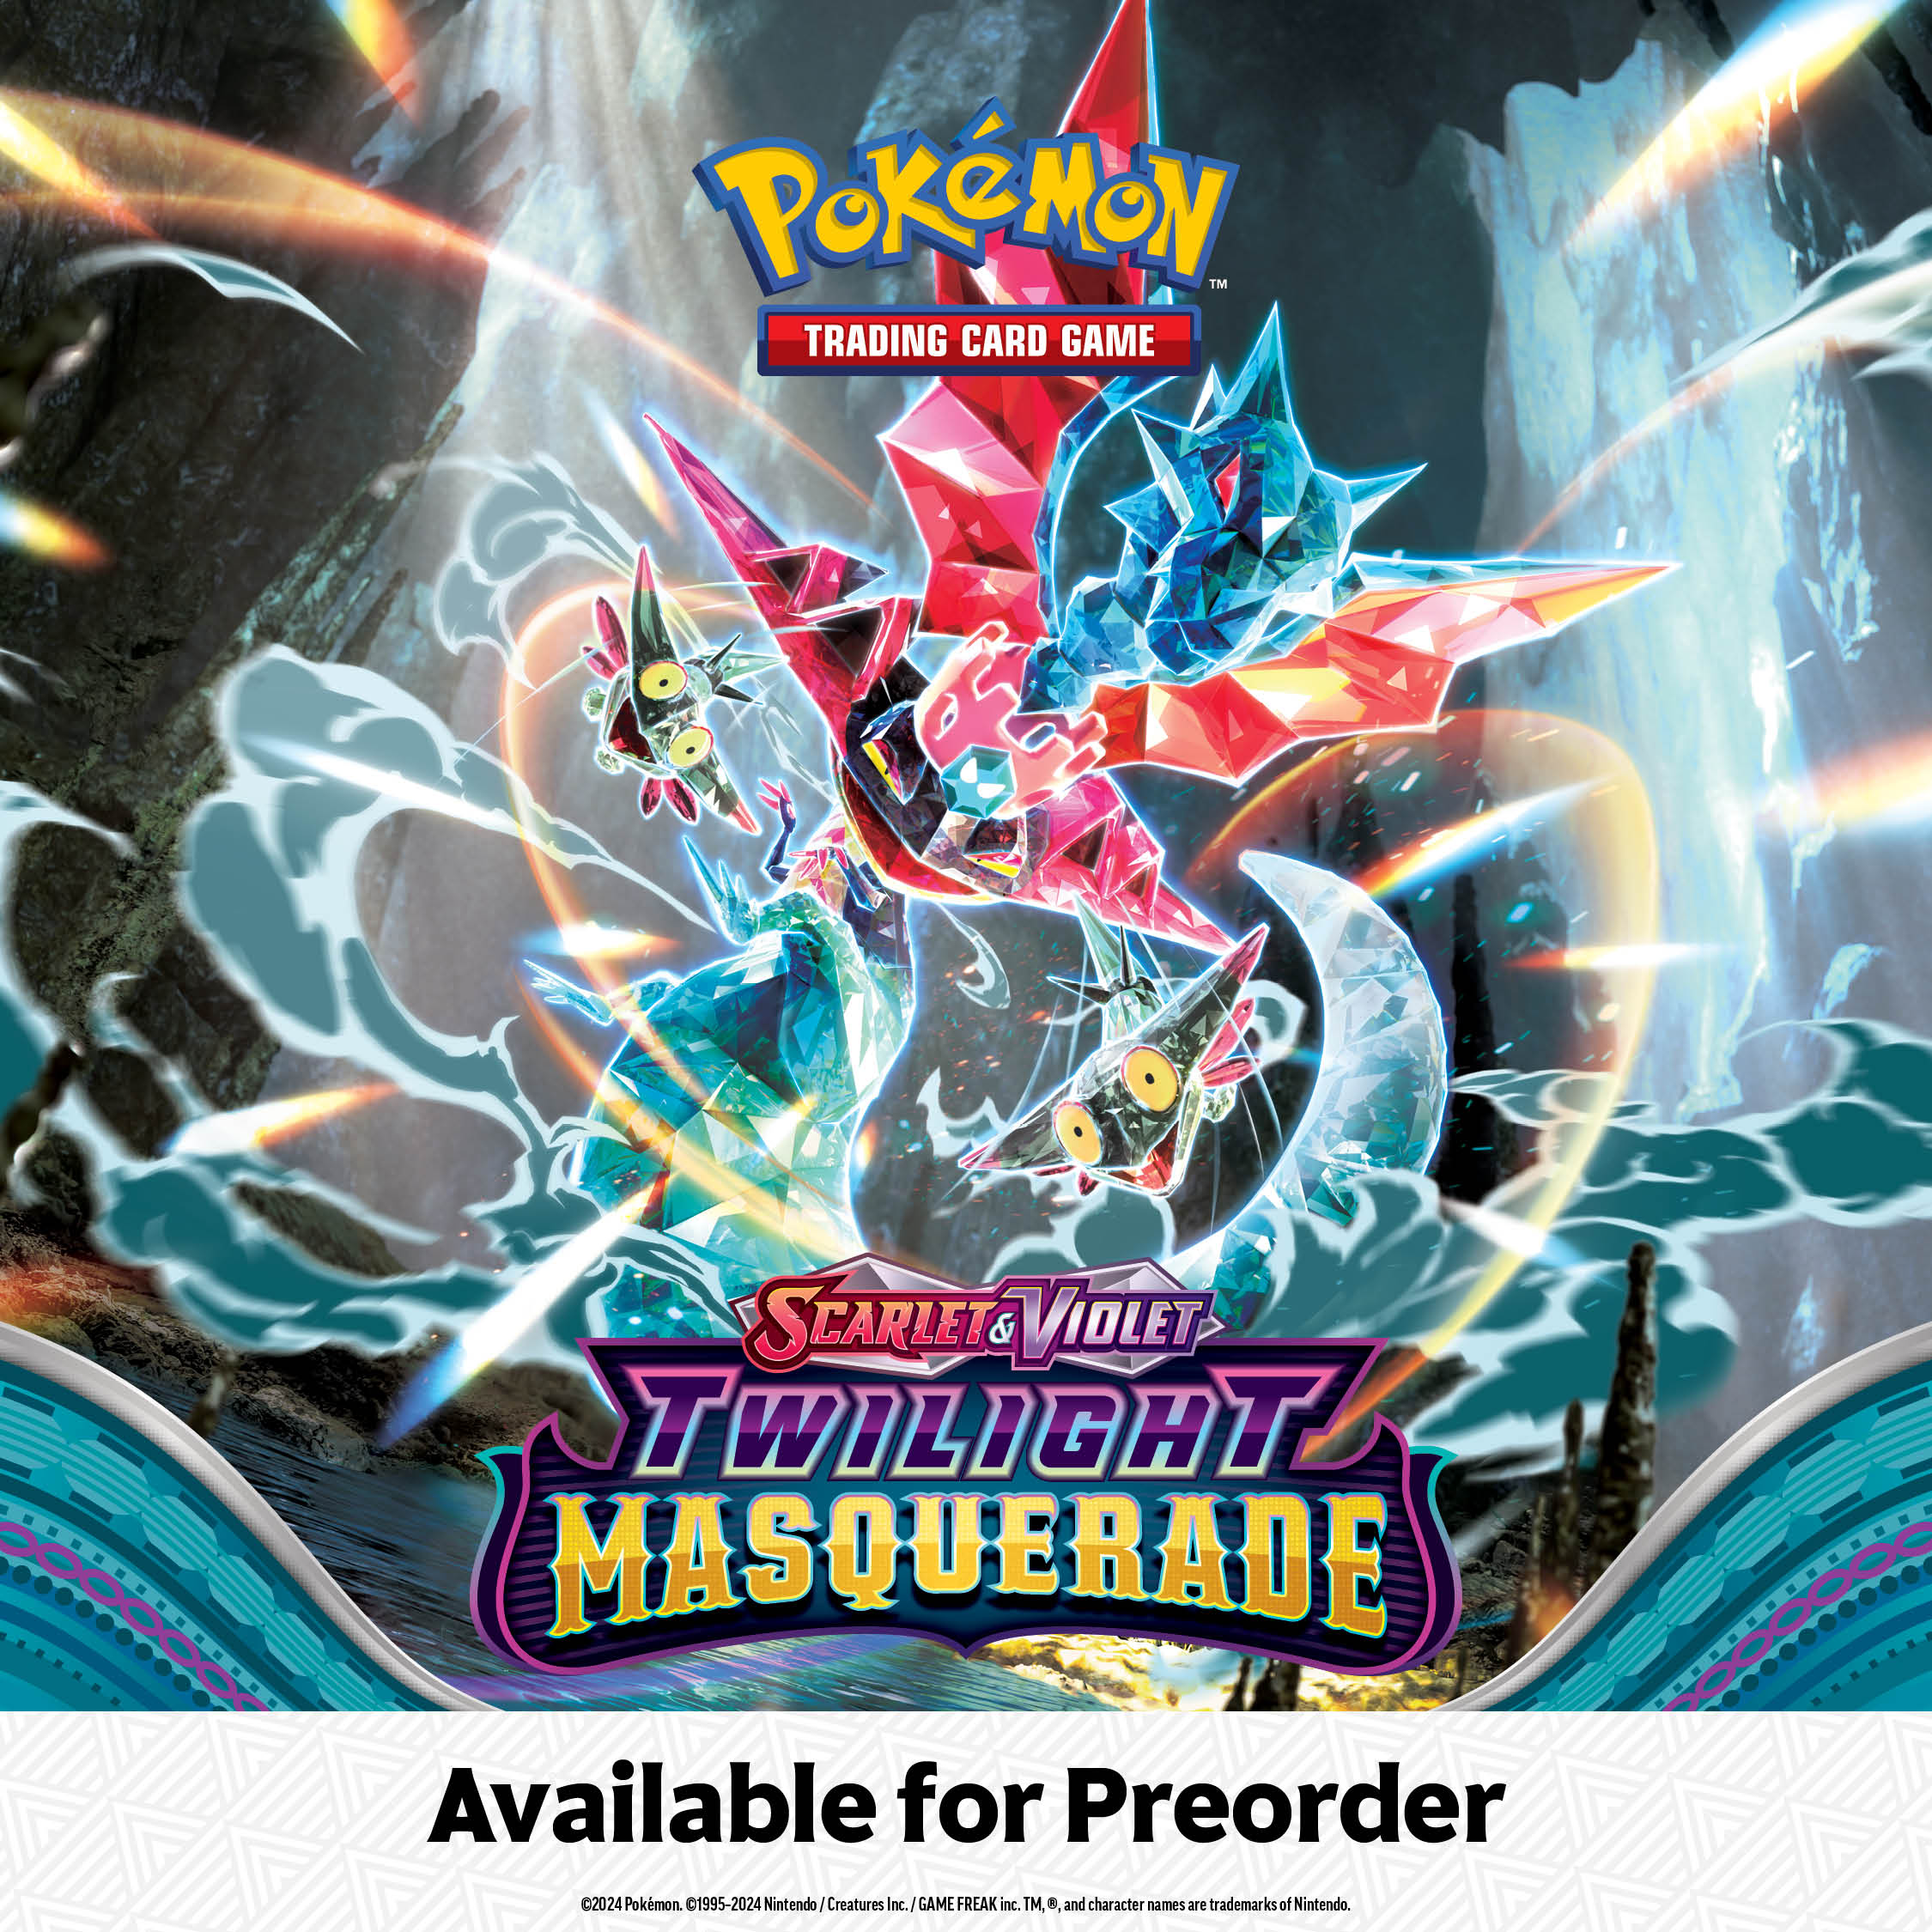 Twilight Masquerade available for preorder